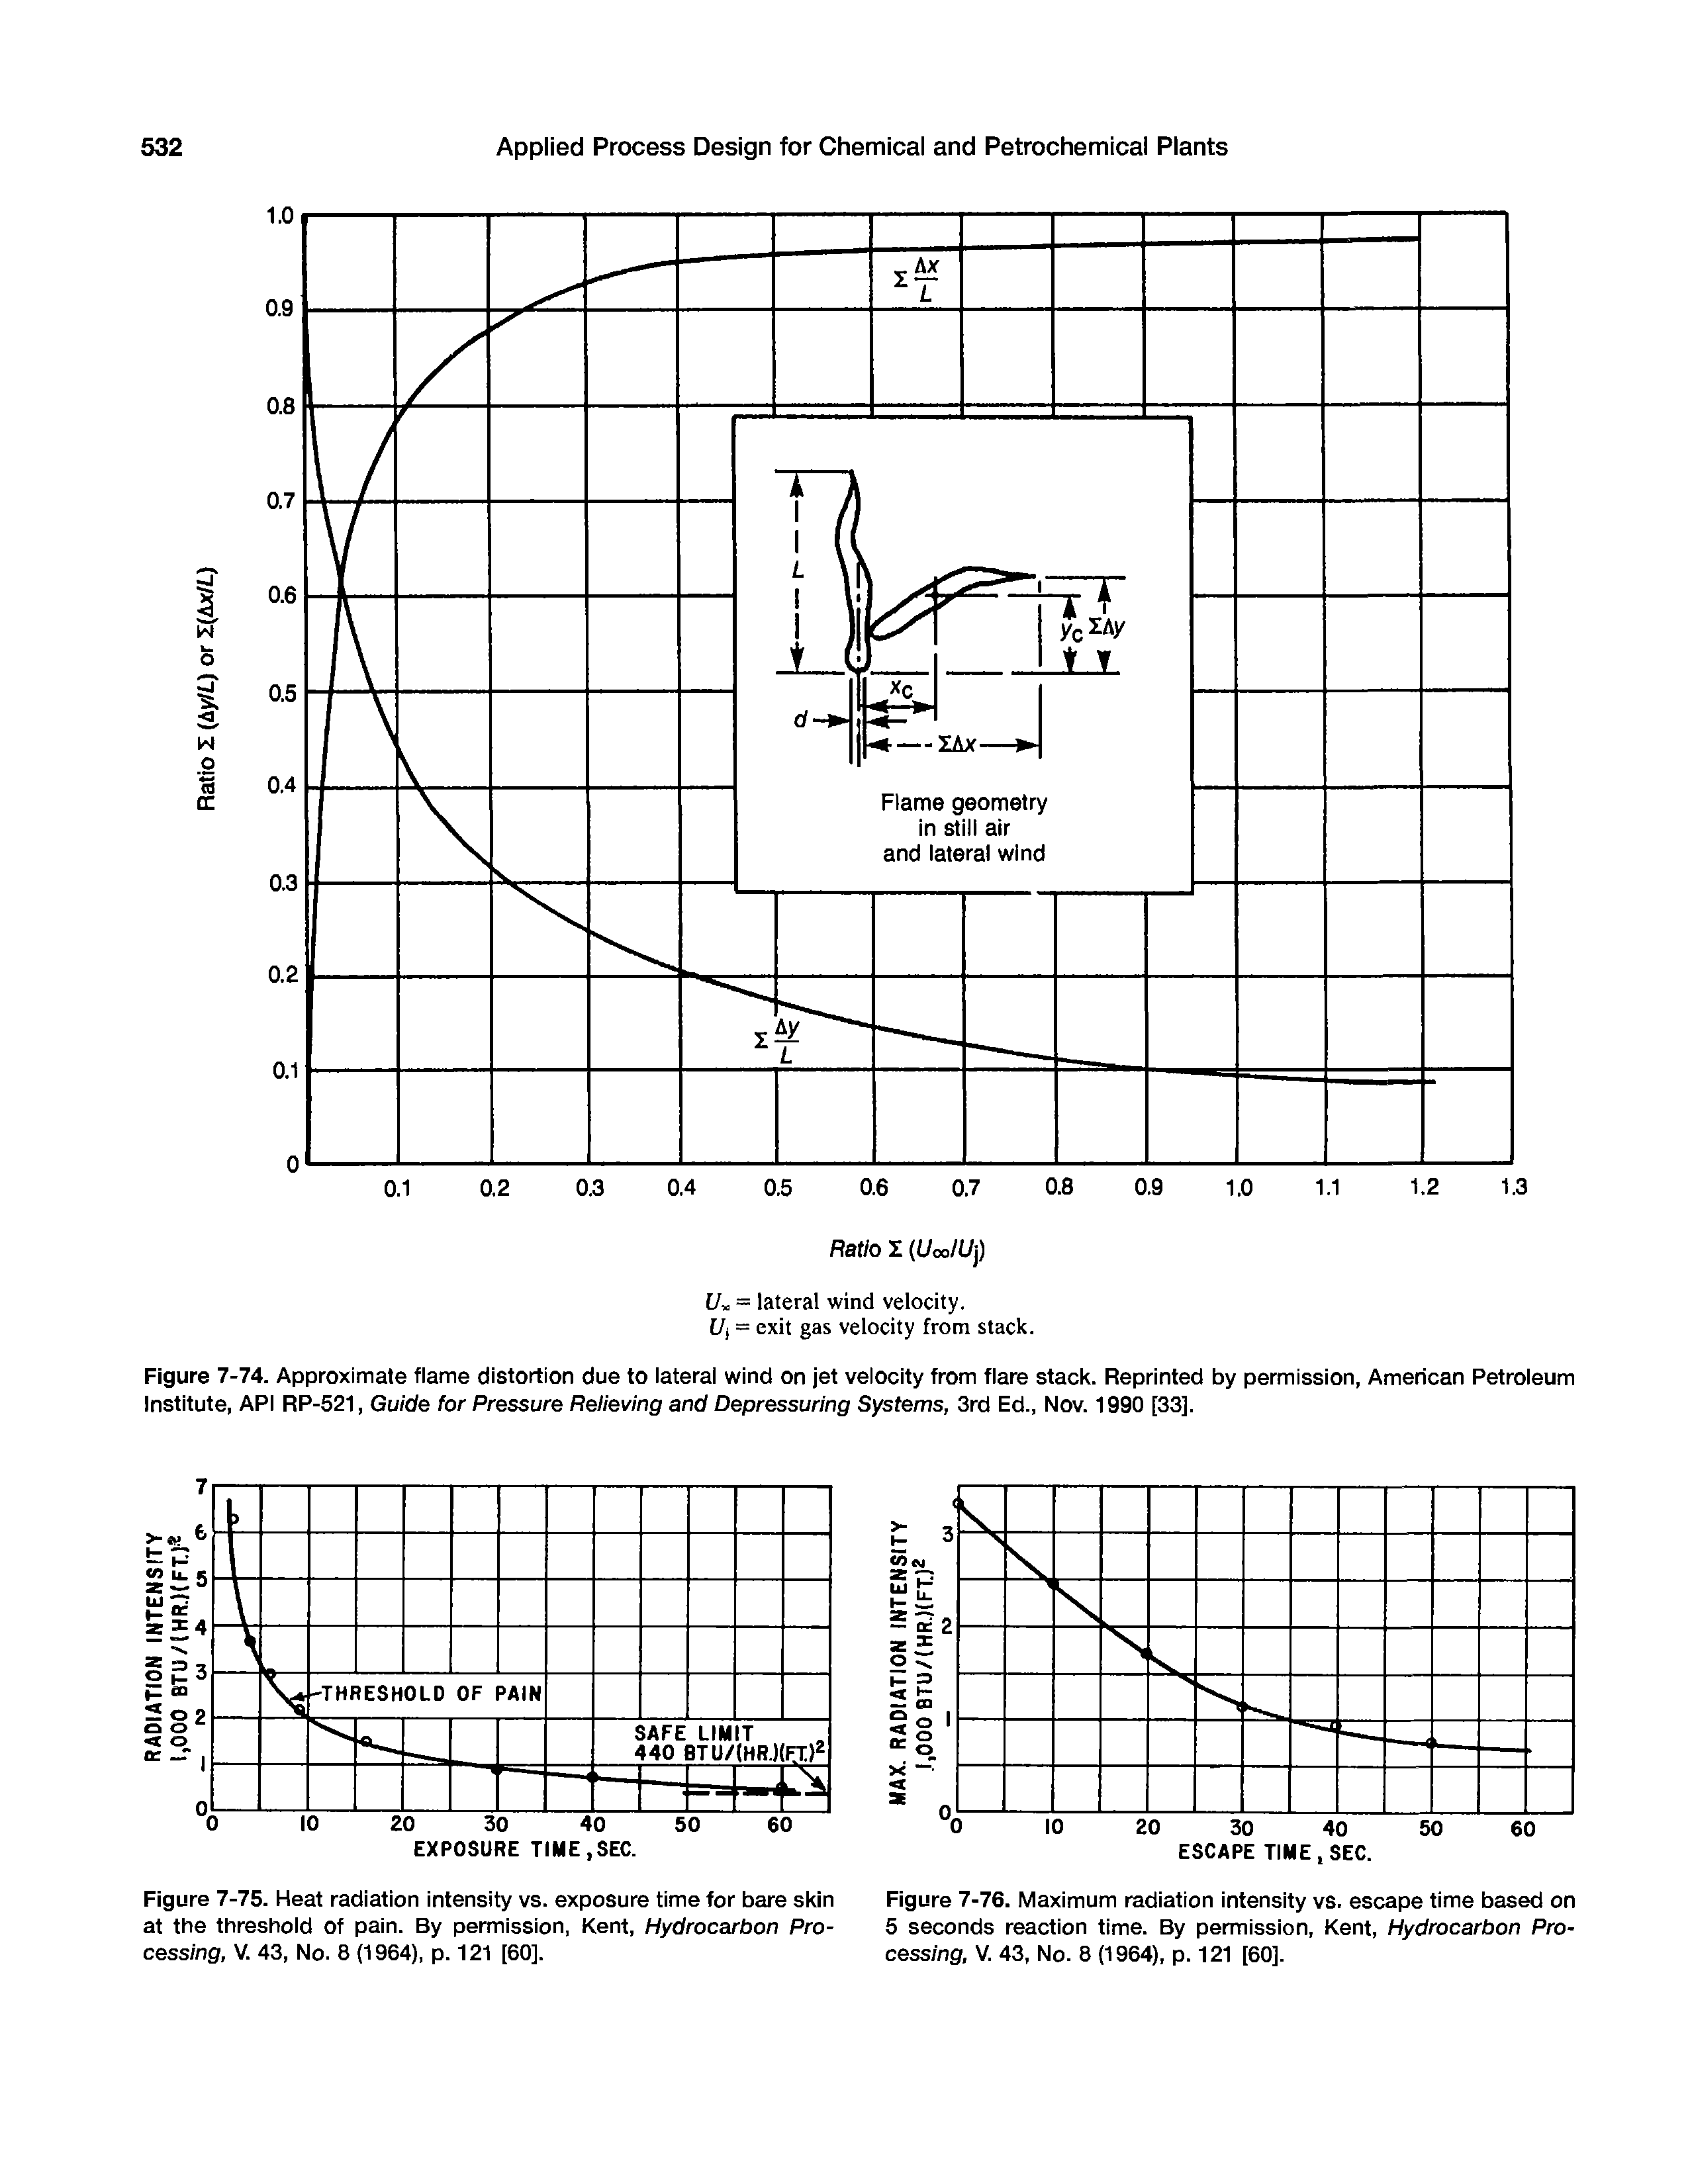 Figure 7-75. Heat radiation intensity vs. exposure time for bare skin at the threshold of pain. By permission, Kent, Hydrocarbon Processing, V. 43, No. 8 (1964), p. 121 [60].